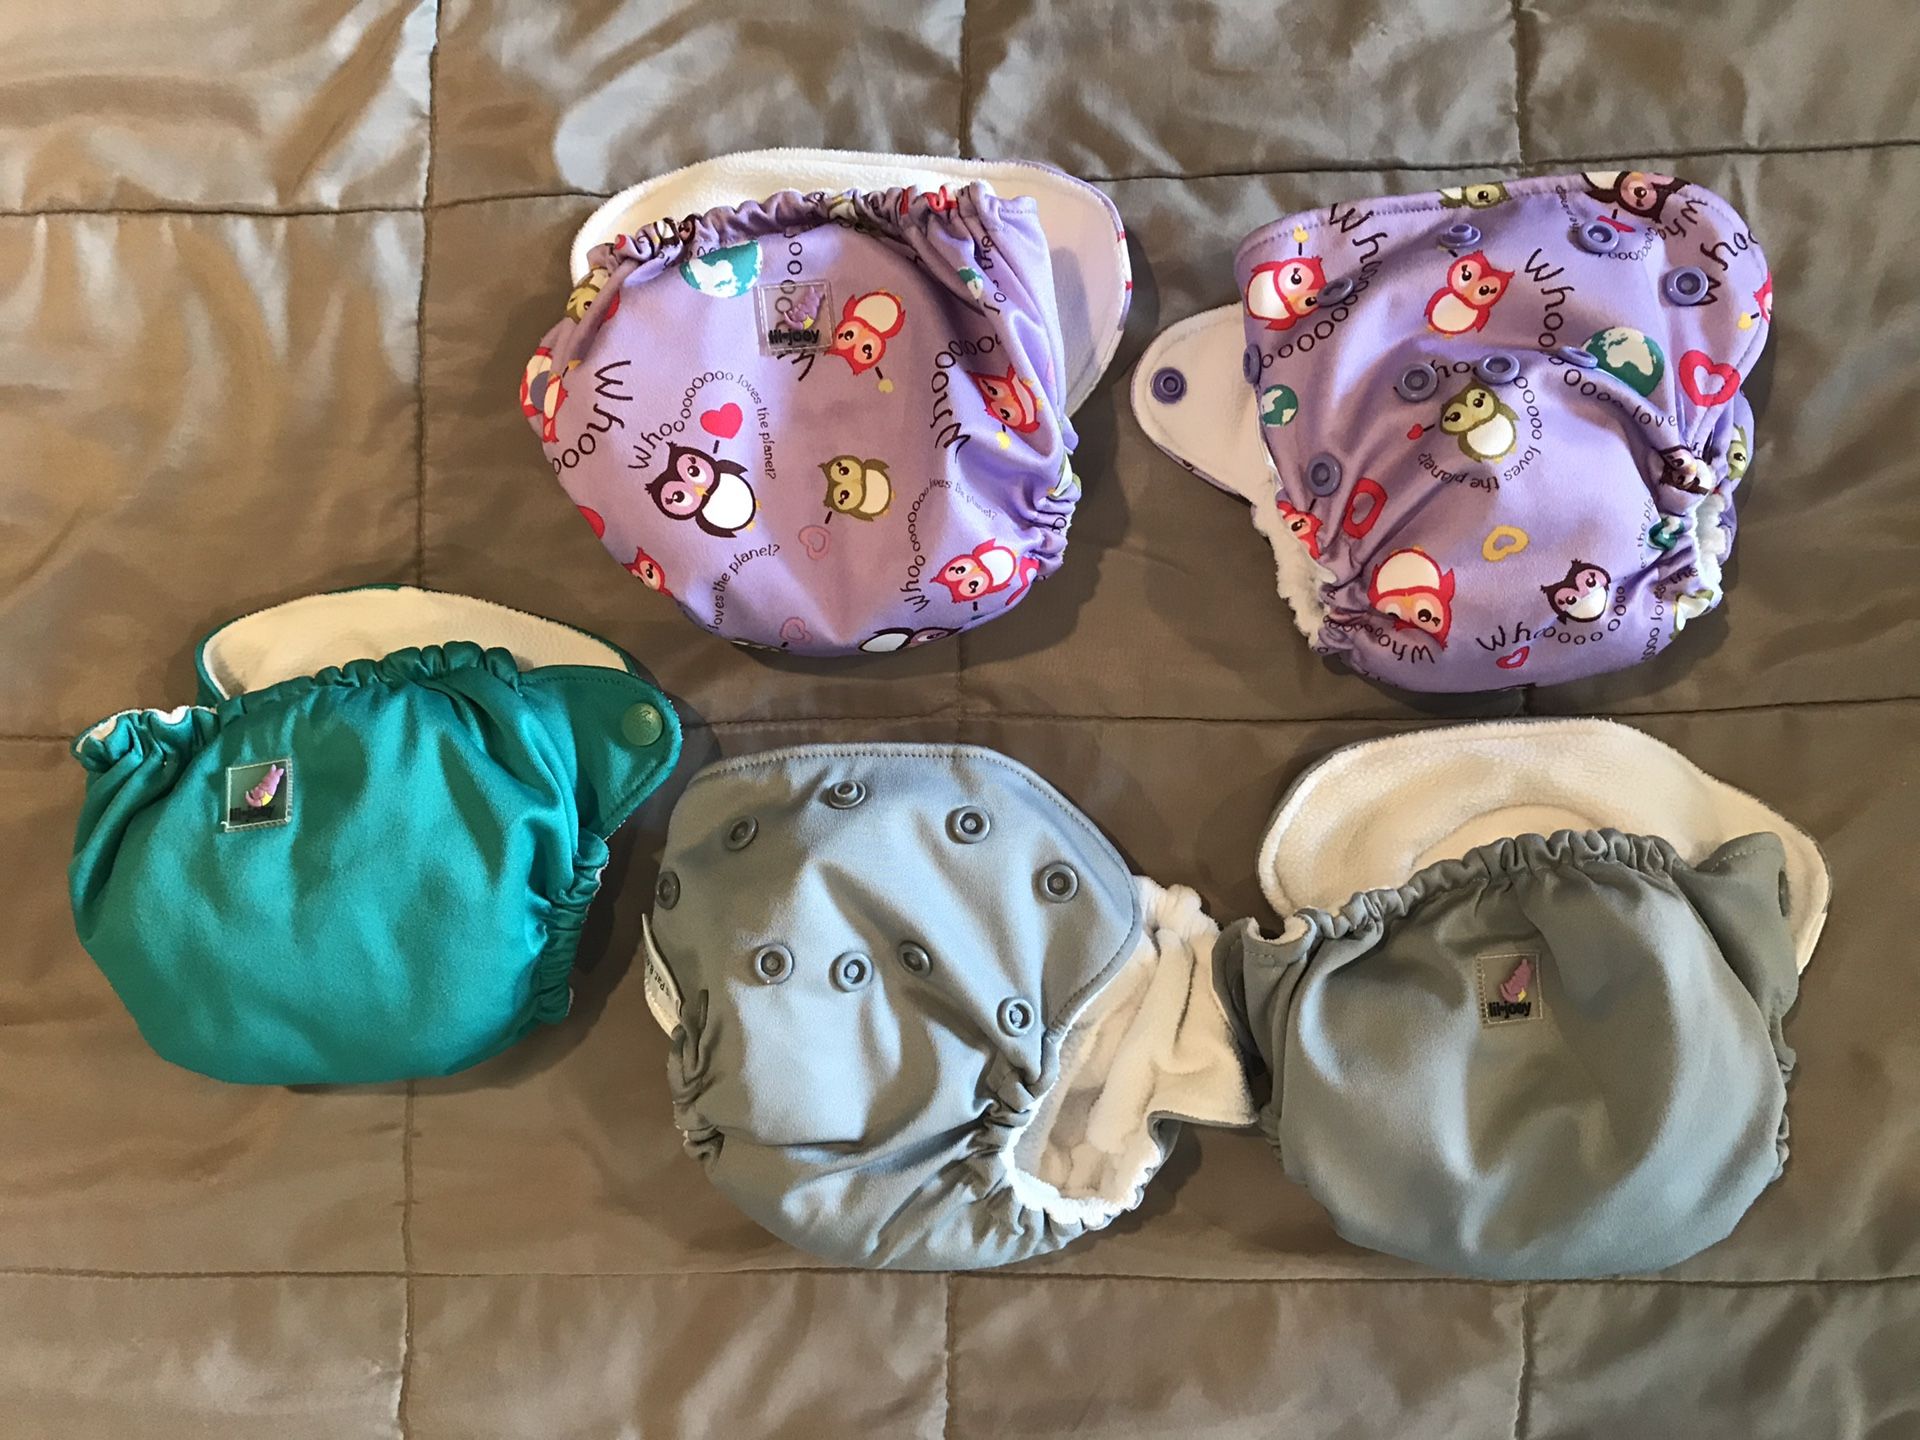 Newborn All in One Cloth Diapers Lil Joey Kanga Care